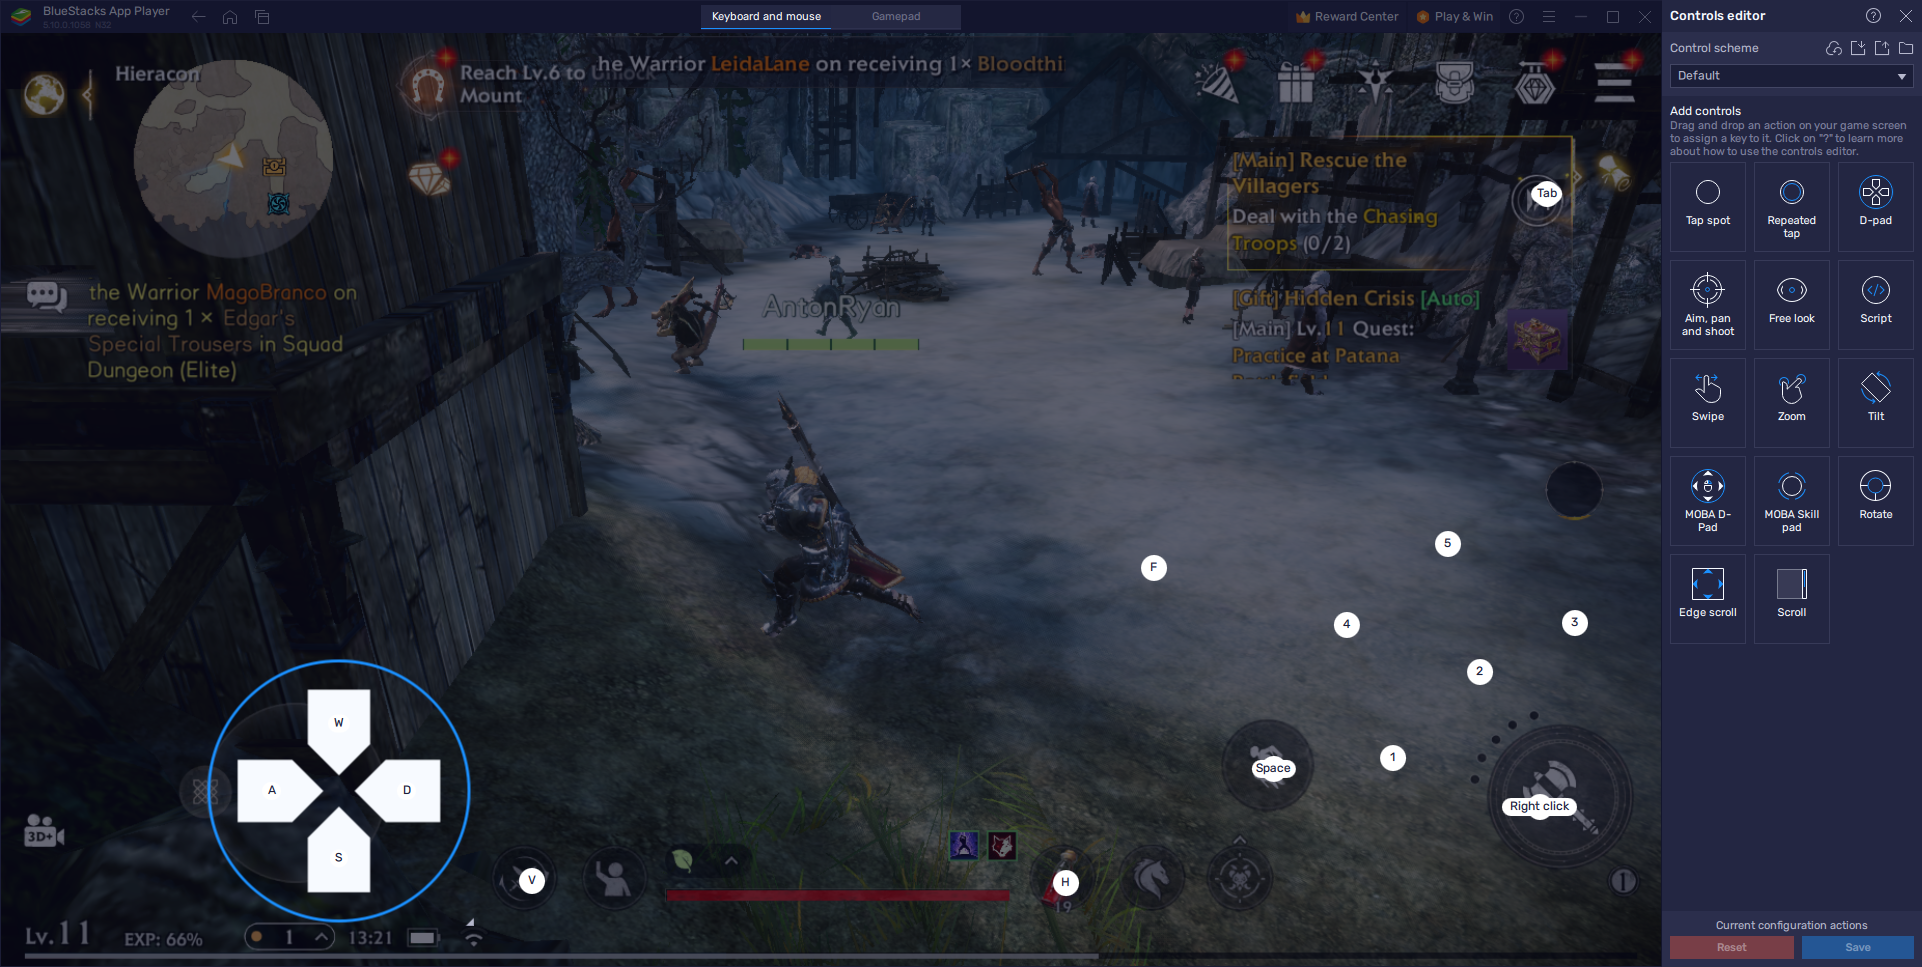 Bless Global on PC - How to Enhance Your Gameplay Using BlueStacks and its Tools and Features